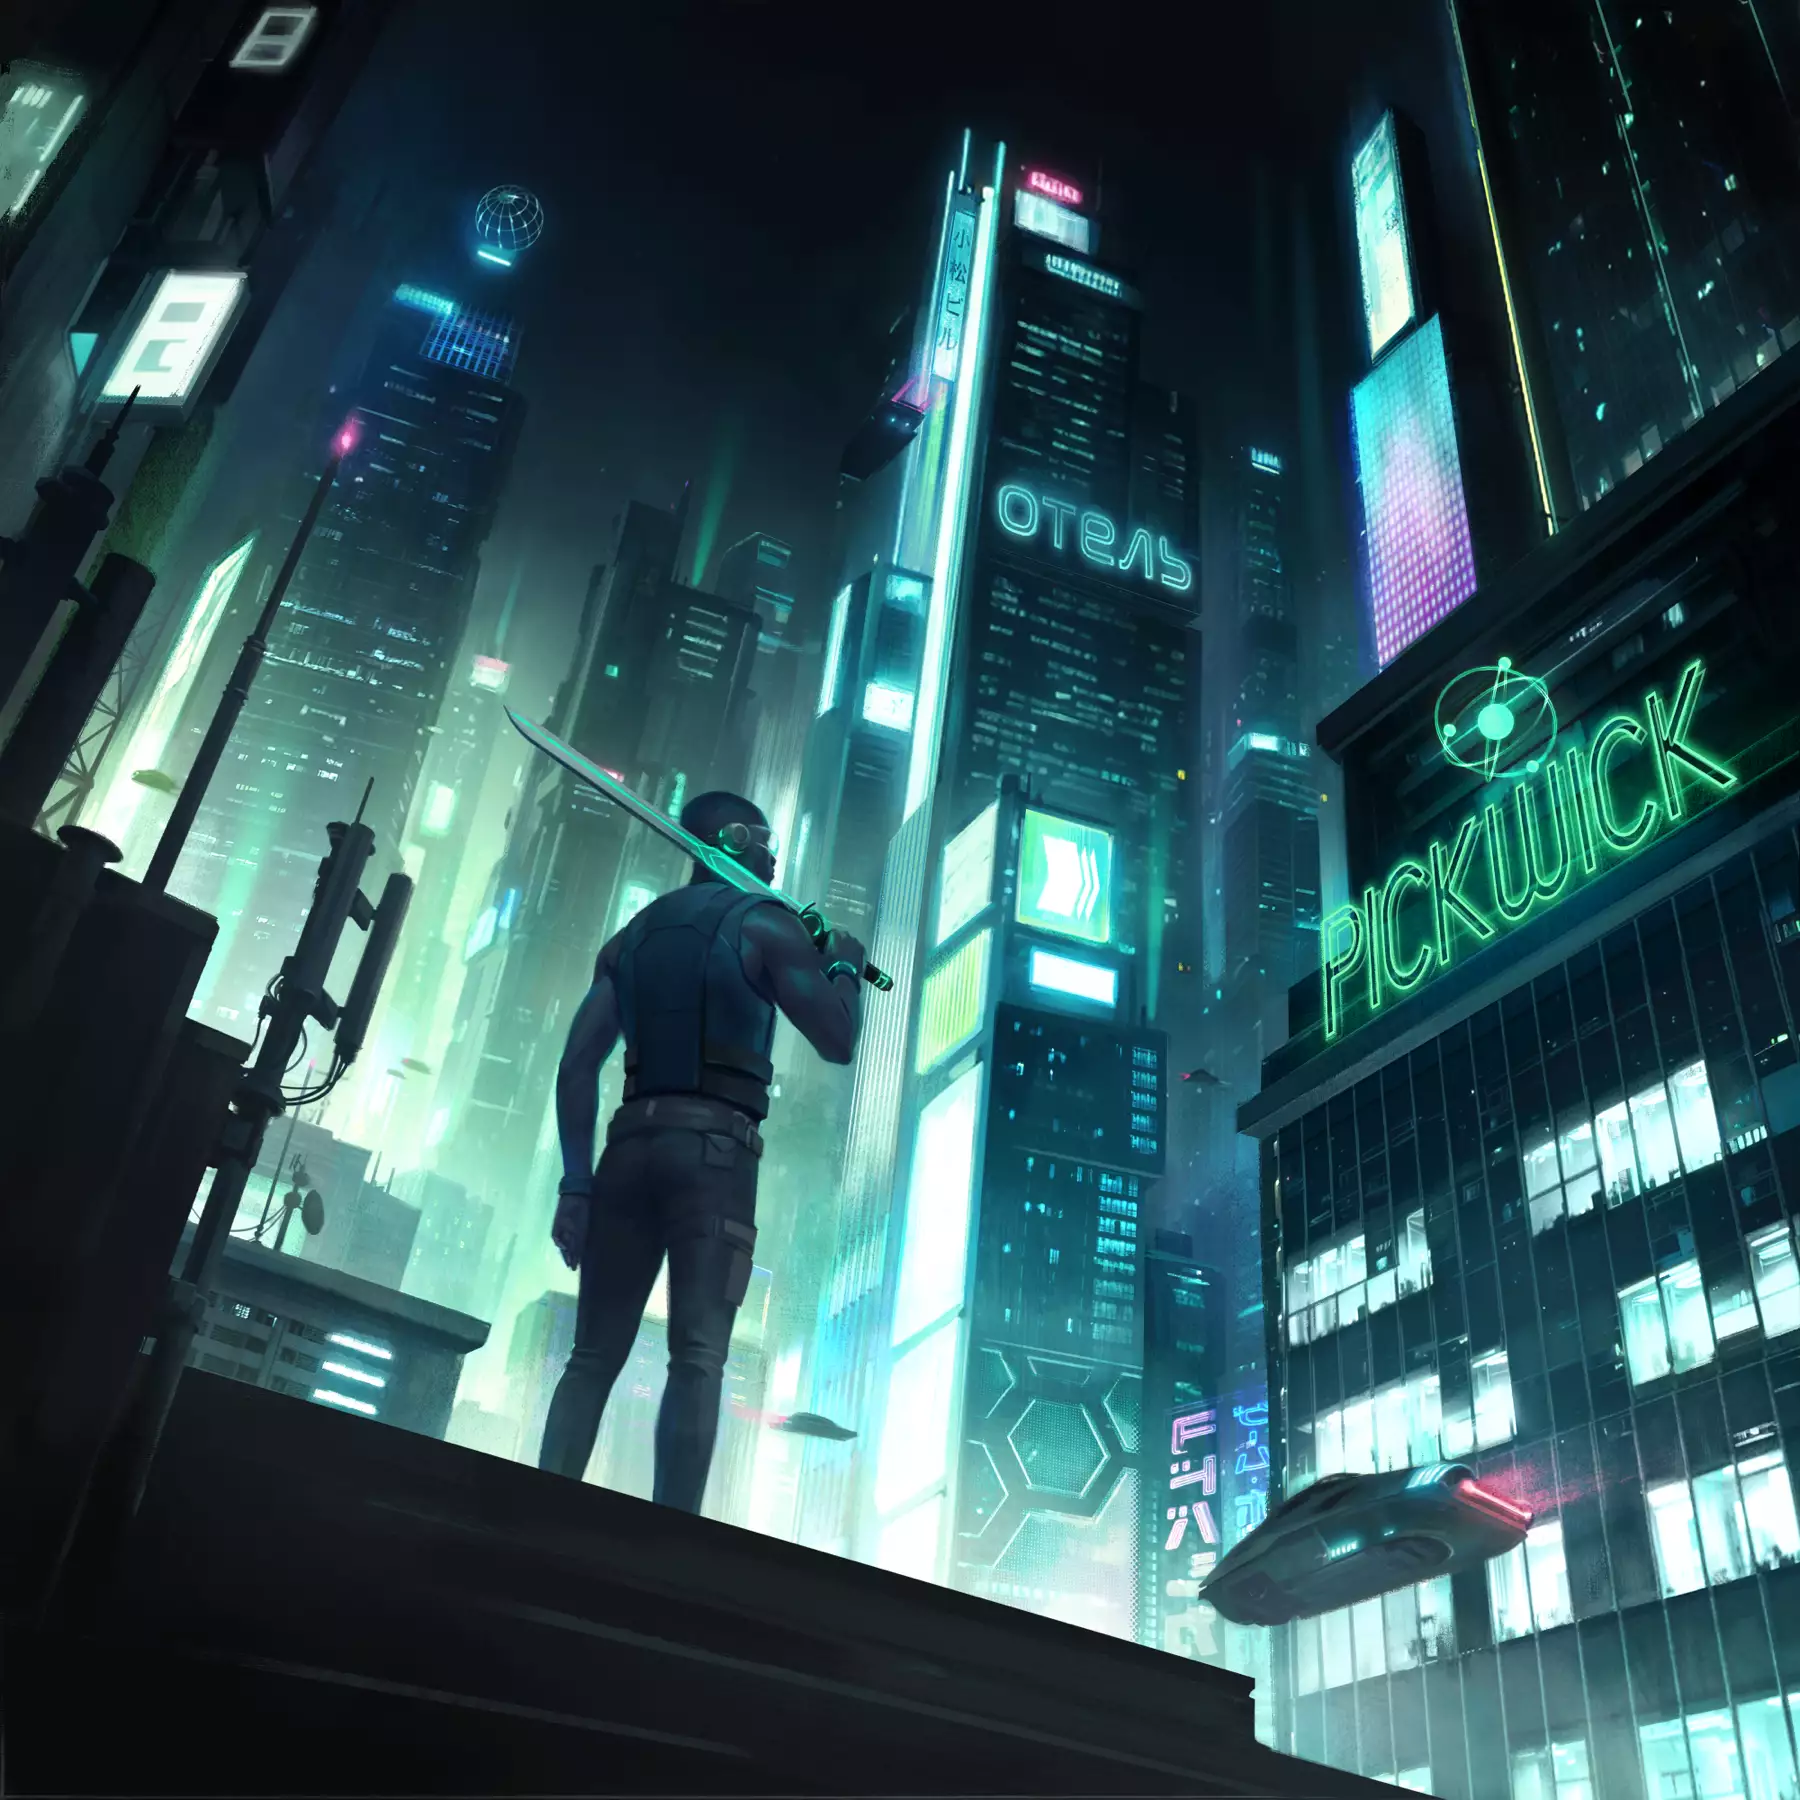 A shadowy figure carrying a sword stands on a rooftop gazing out at a futuristic cityscape.